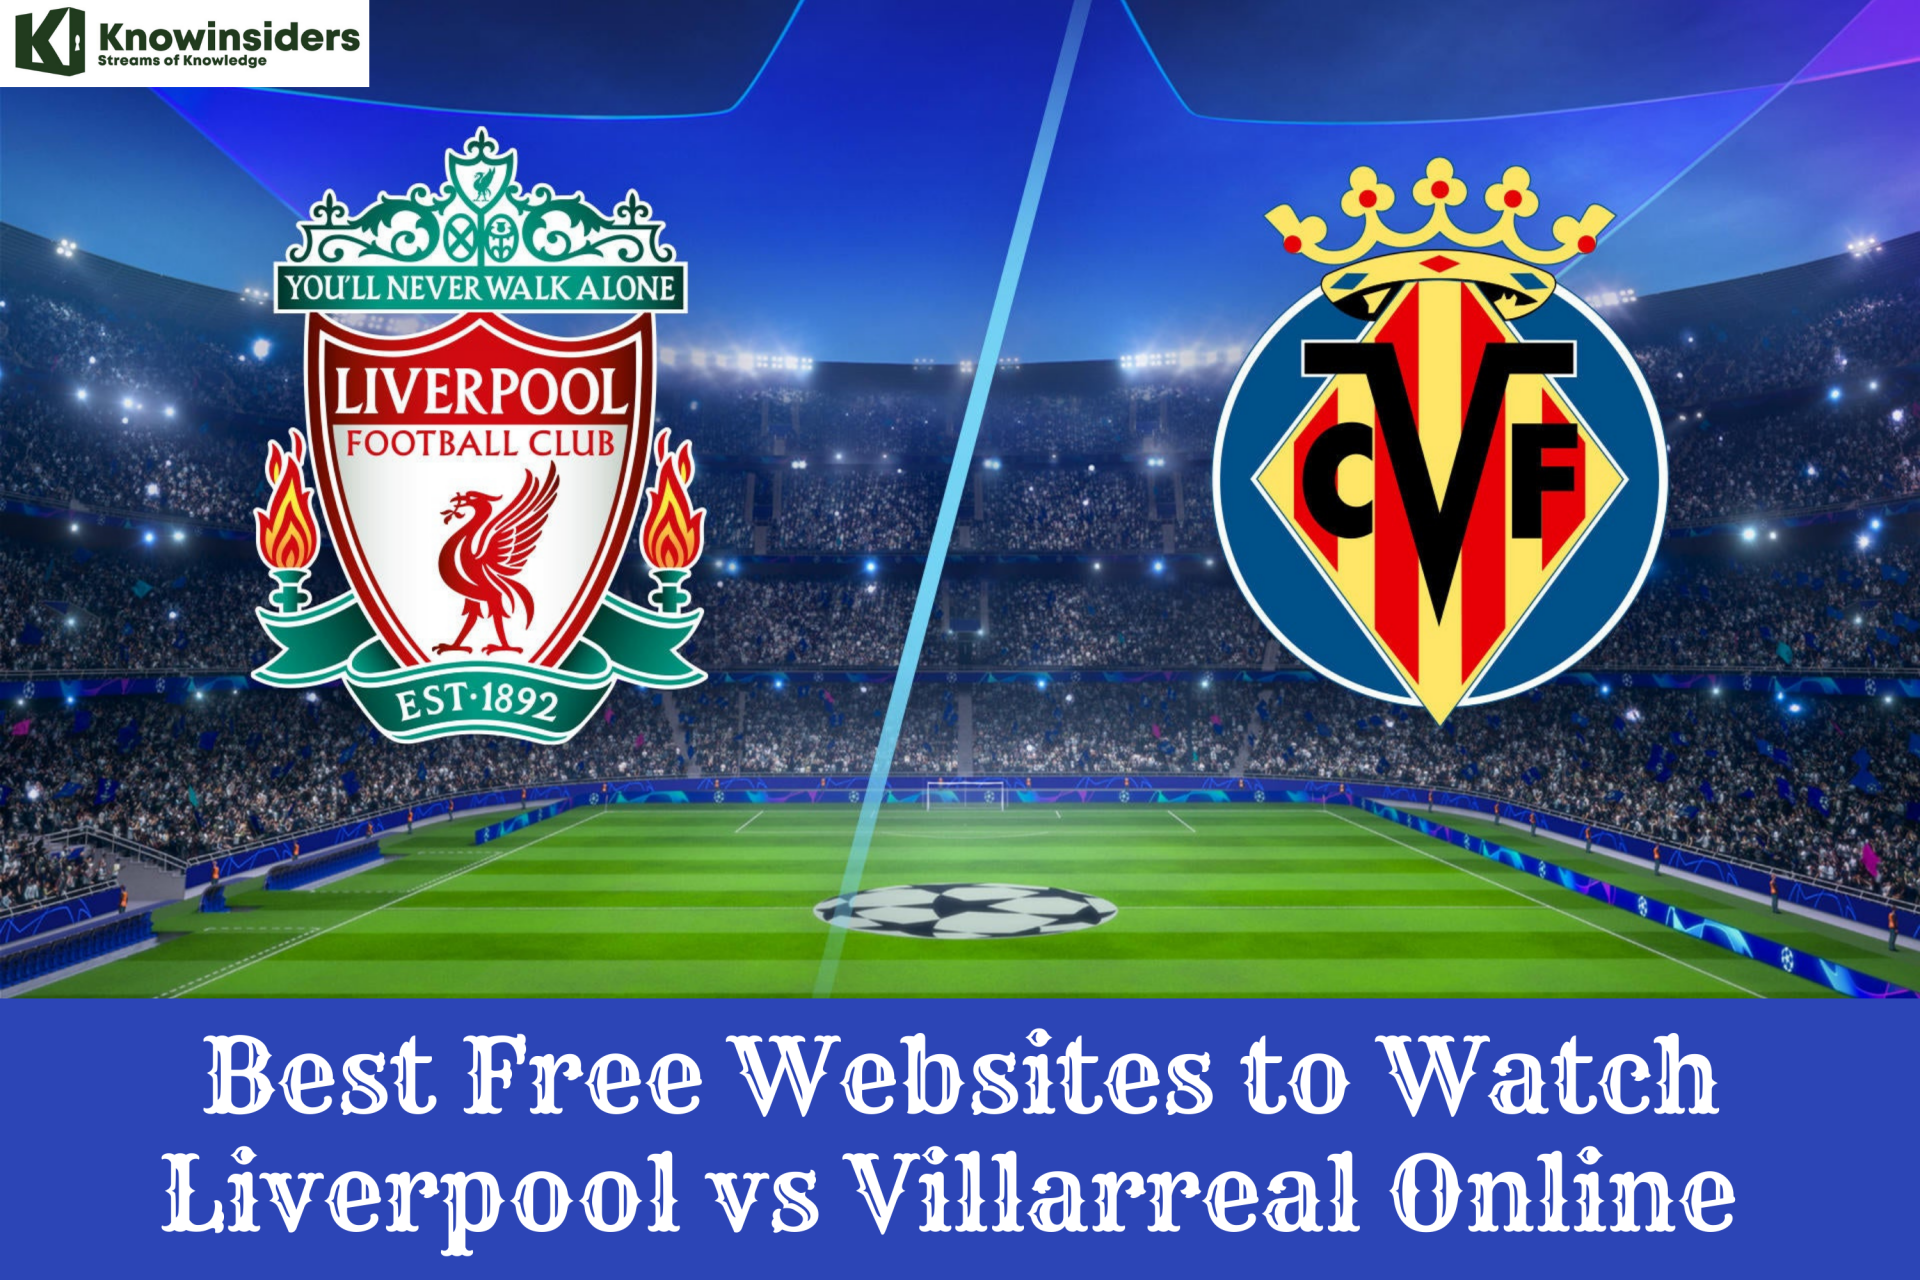 Best Free Sites to Watch Liverpool vs Villarreal Online Anywhere in the World